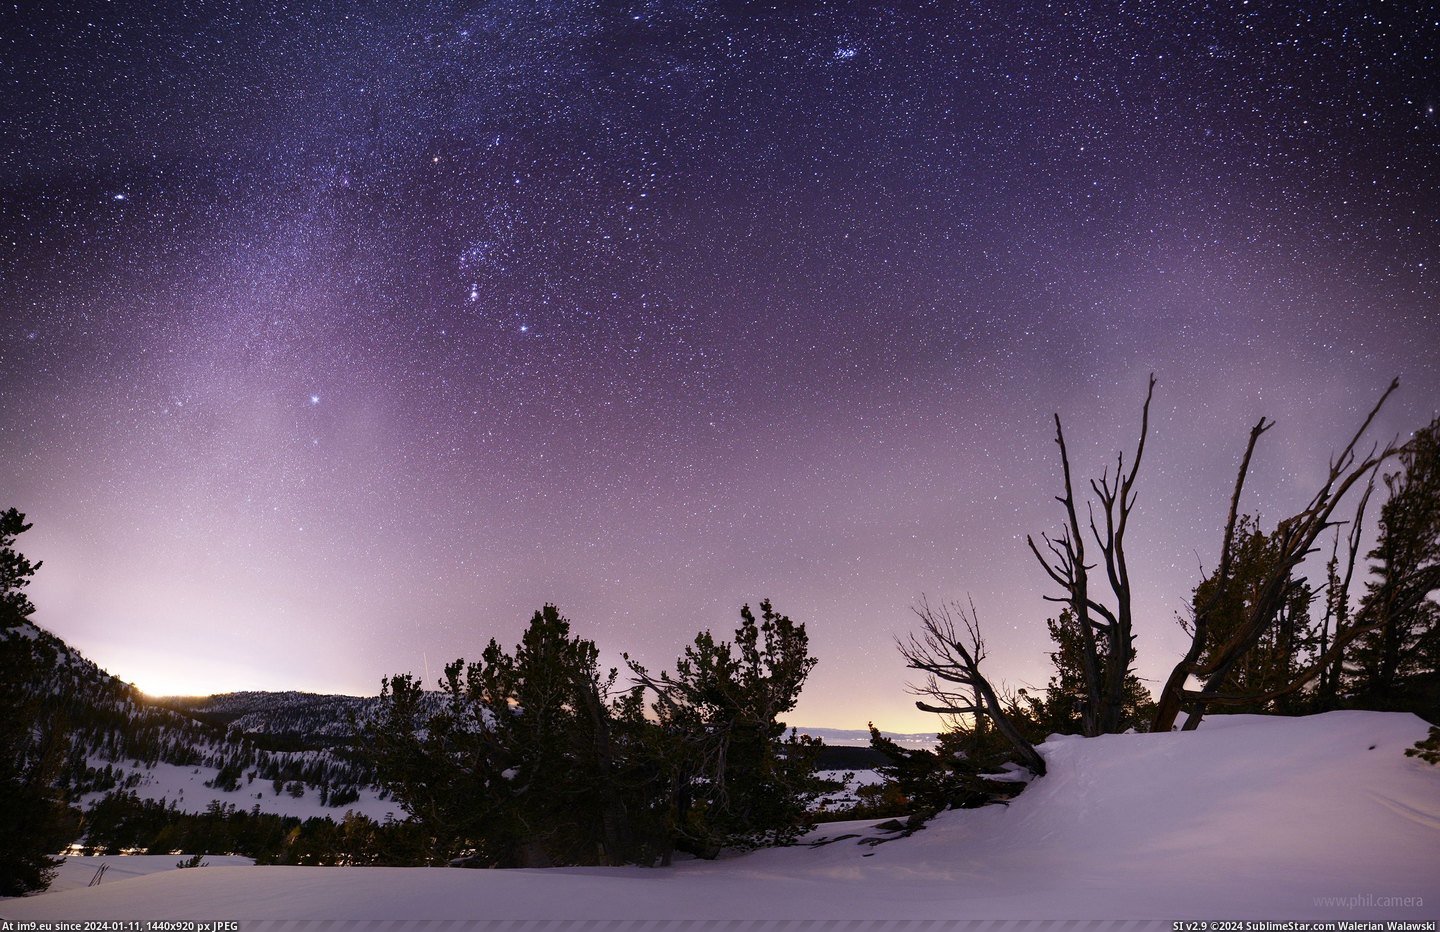 #Nature #Photo #Wallpaper #Night #Lake #Left #Winter #Rose #Sky #Stars [Earthporn] Winter Night Sky over The Mt Rose - Sheep Flat meadow last night, with Carson down to the left and Lake Tahoe peakin Pic. (Изображение из альбом My r/EARTHPORN favs))